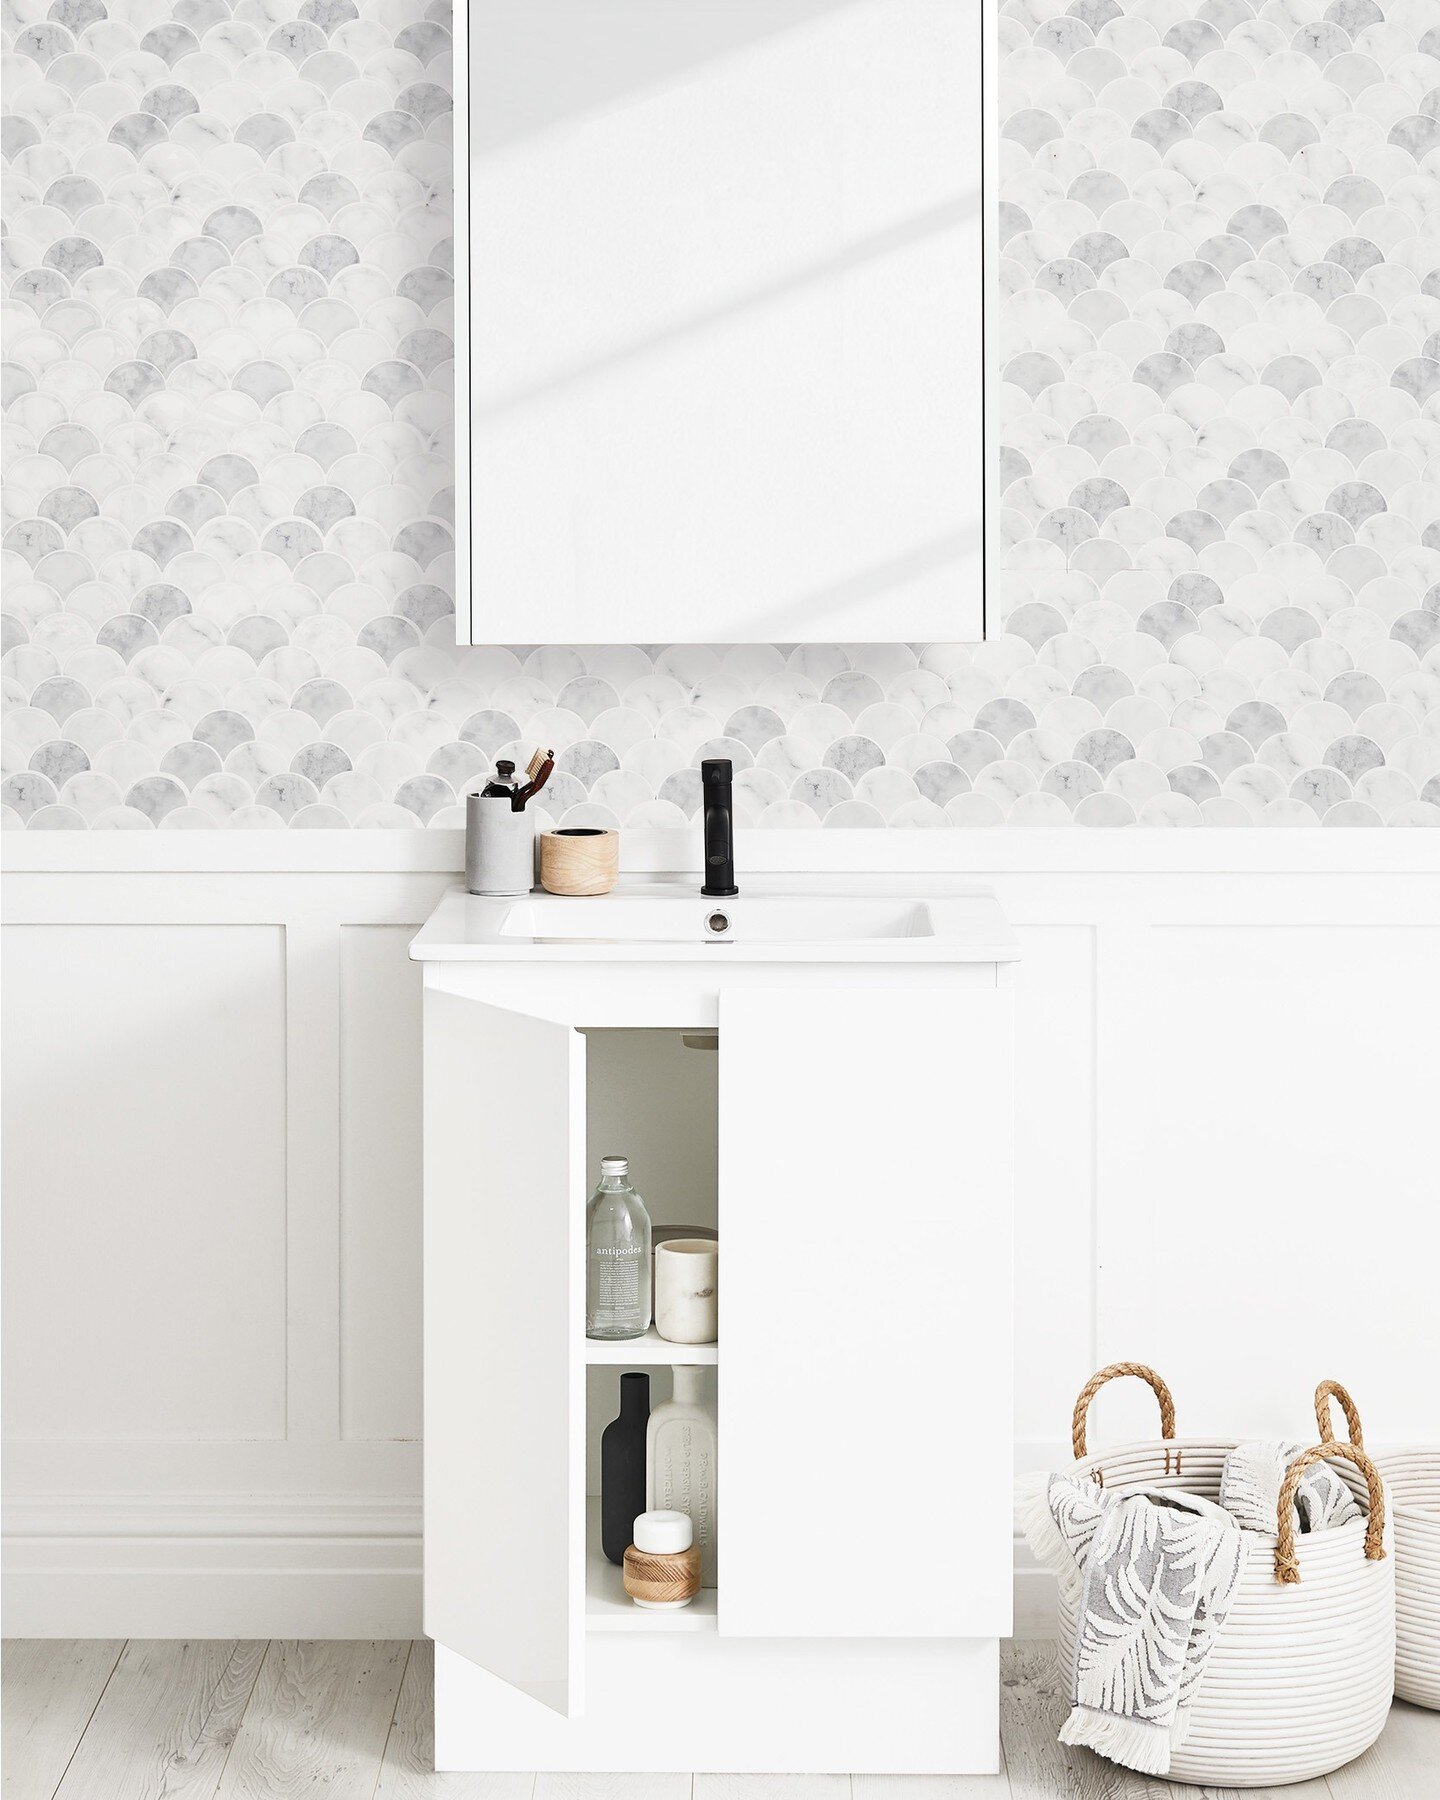 When your bathroom is short on space, the right vanity can really help you live larger within limited square metres. The Tonic 600 Vanity packs plenty of seamless style with storage in a tight space. This compact vanity offers functional storage with